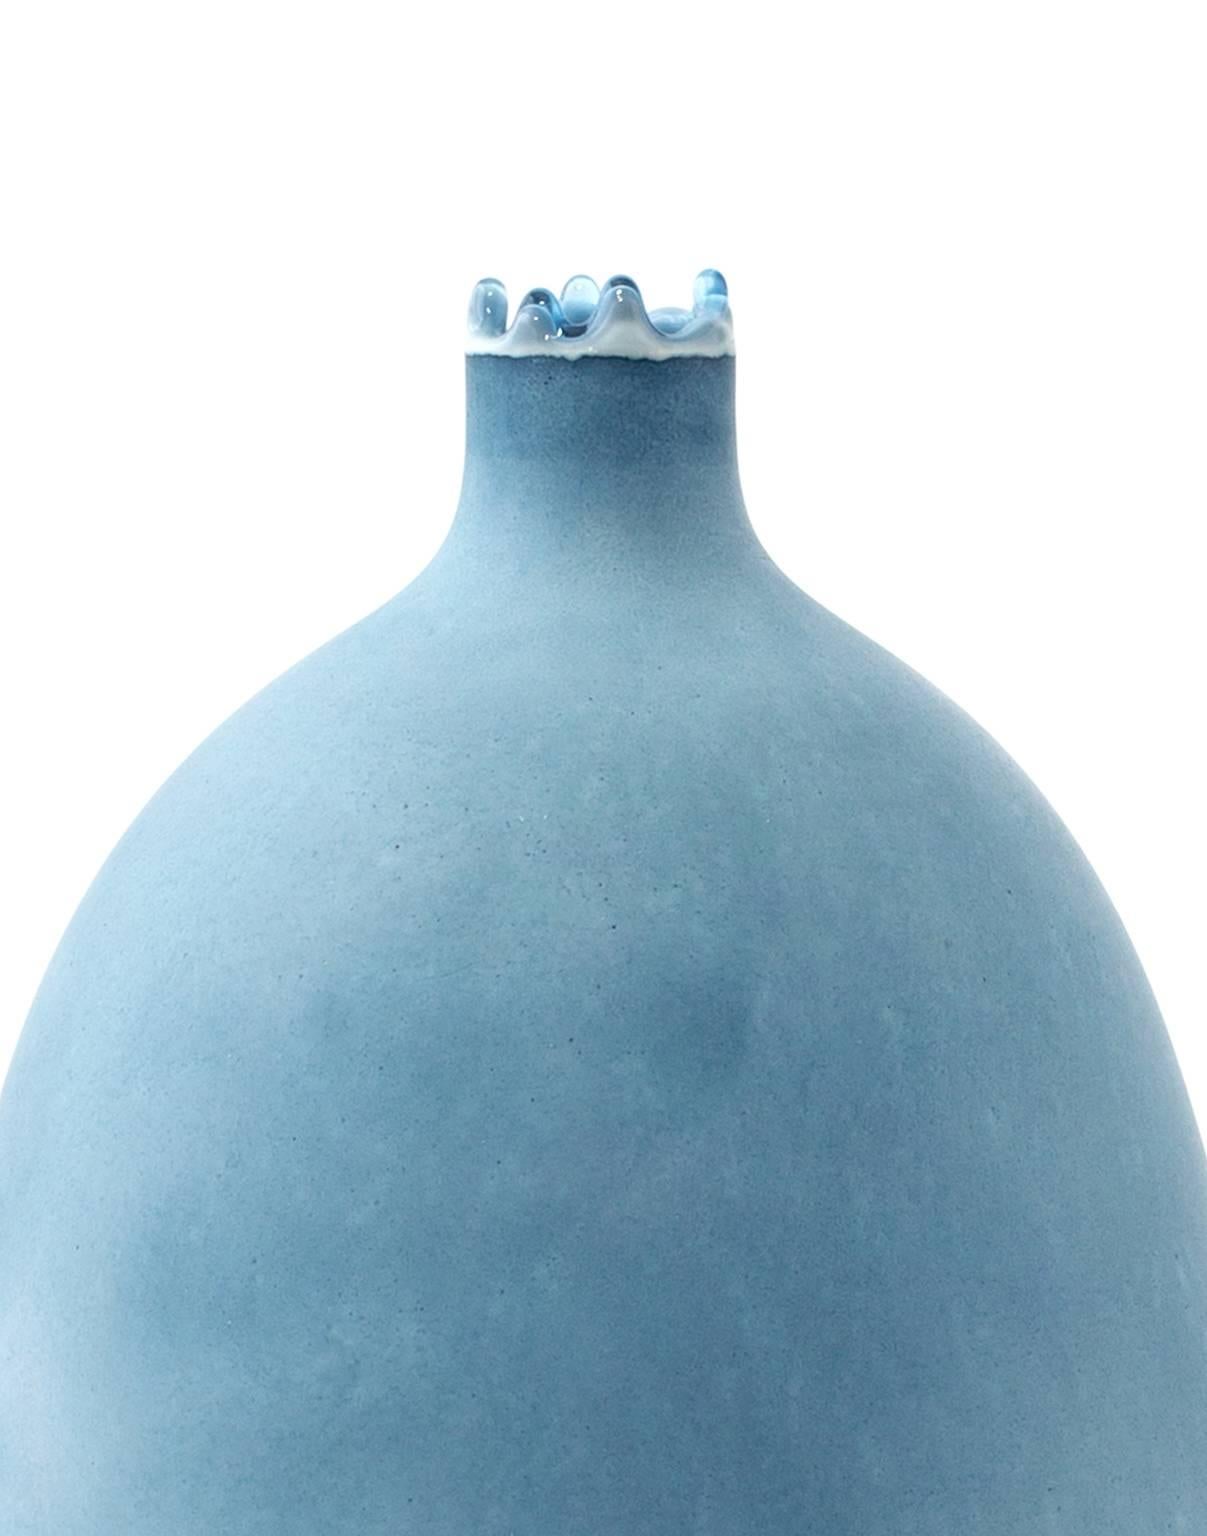 American Unique Handmade 21st Century Blue and Indigo Dip-Dyed Oblong Vase For Sale